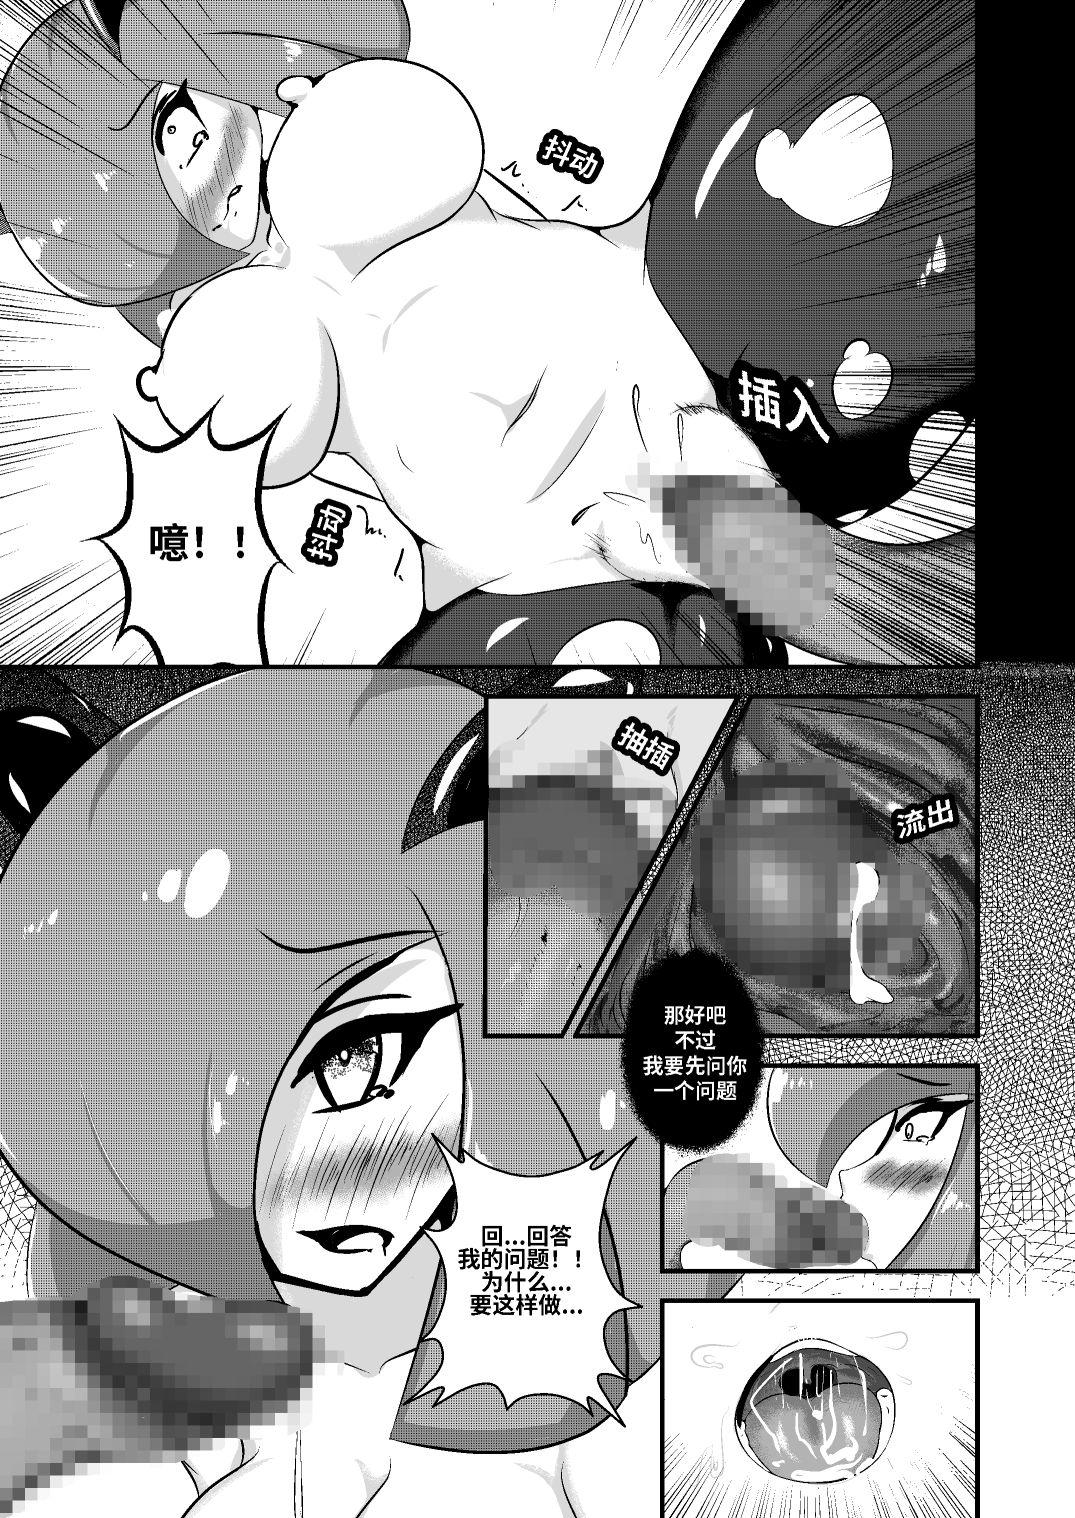 Teenage Girl Porn 沙奈朵家族的占有欲 - Pokemon | pocket monsters Hot Pussy - Page 4